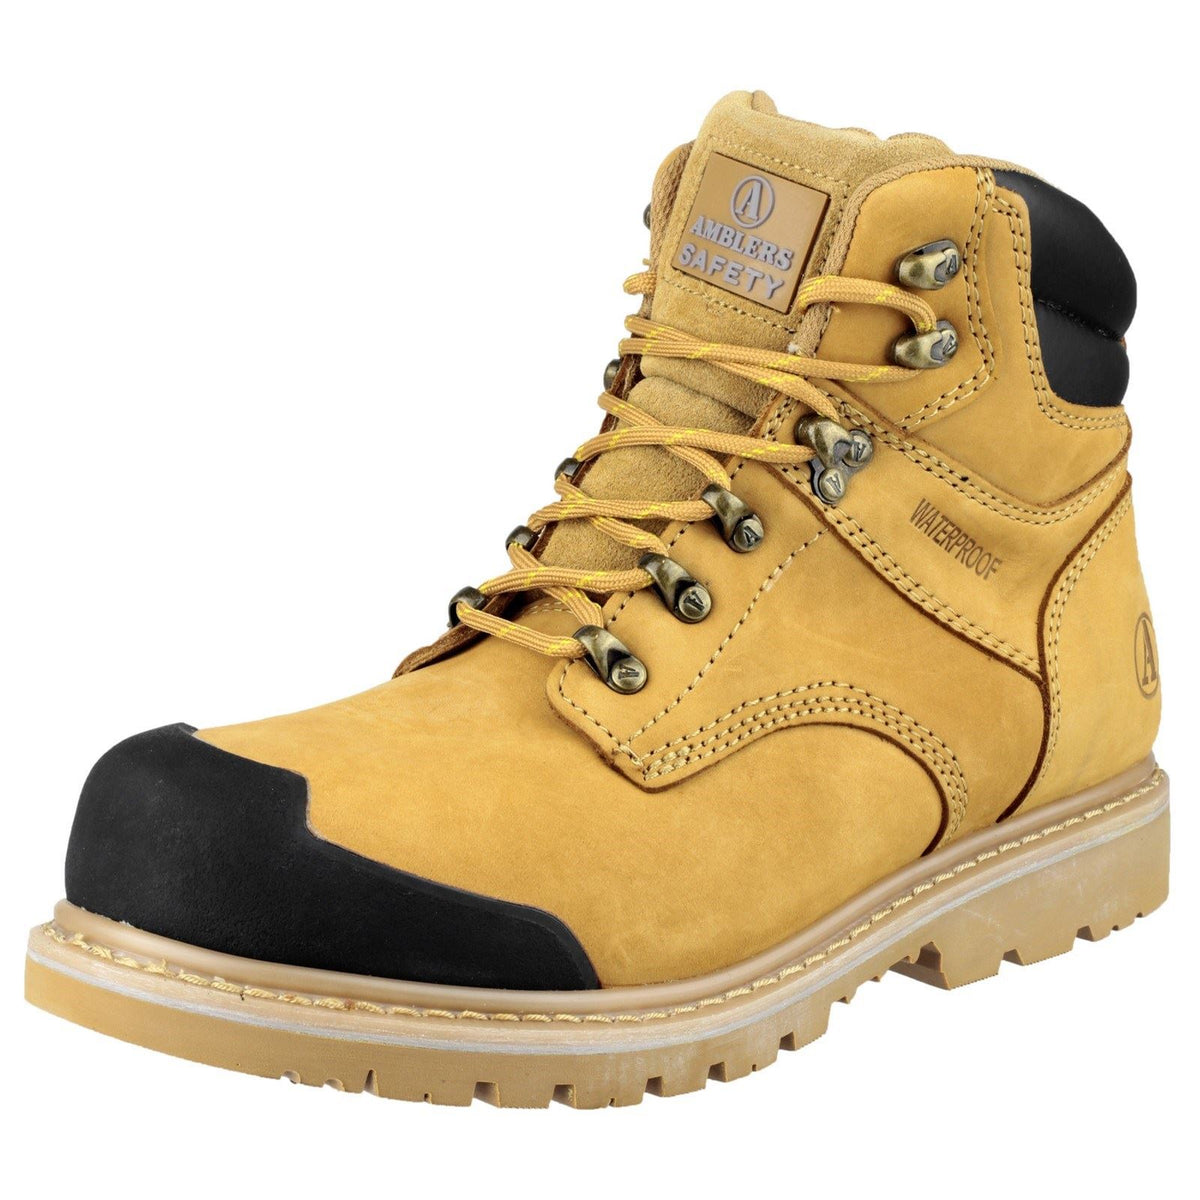 Amblers Safety FS226 Industrial Safety Boots